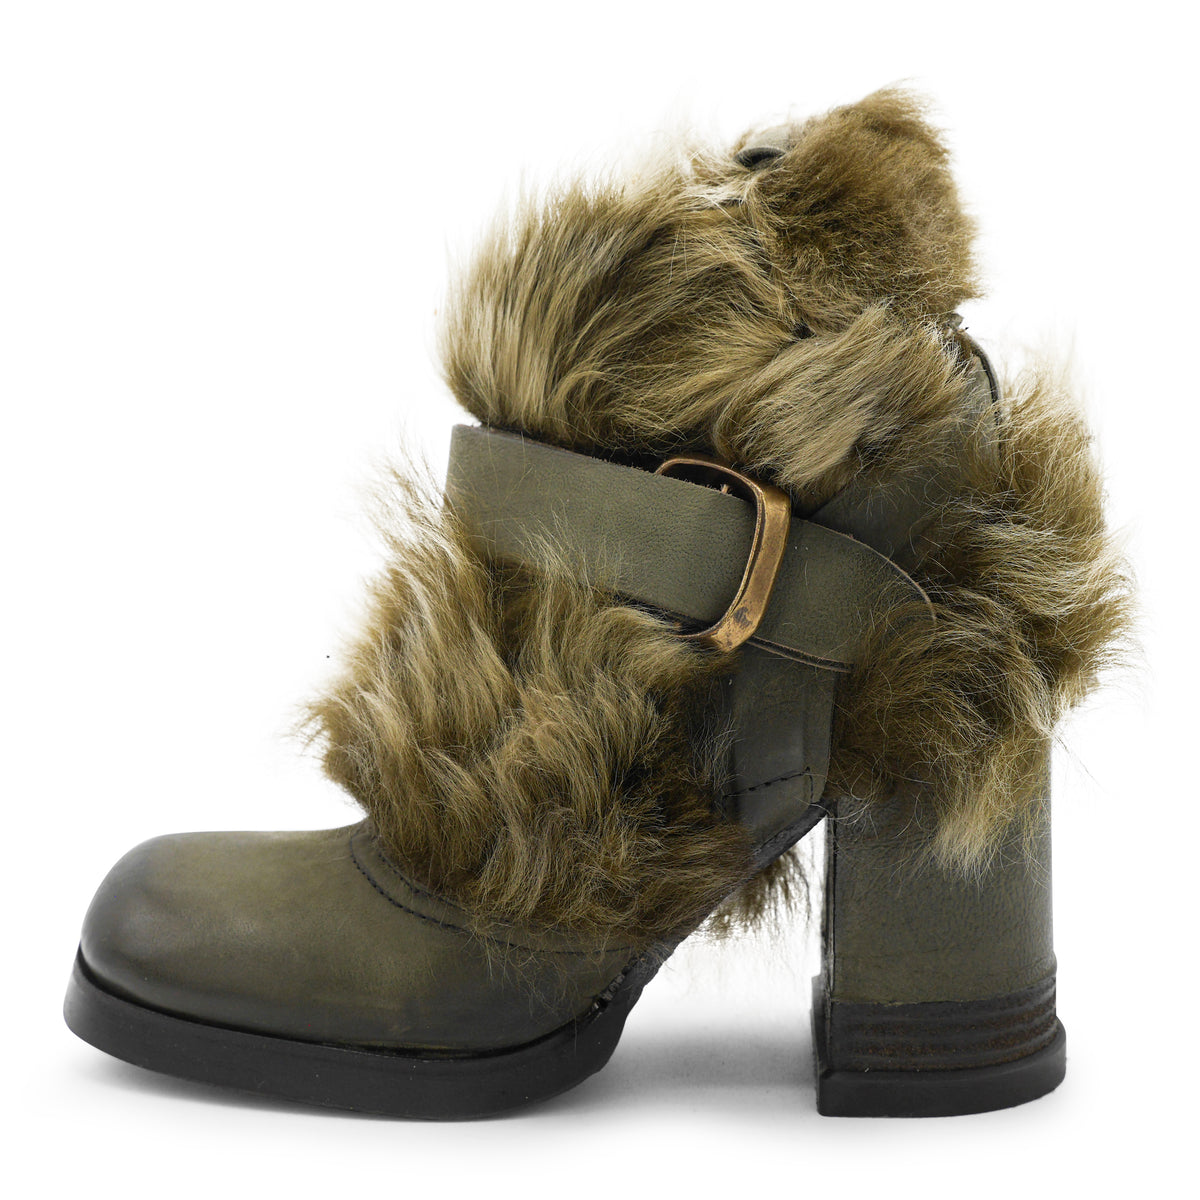 42206 - Jungle Leather Buckle Strap Boot With Fur